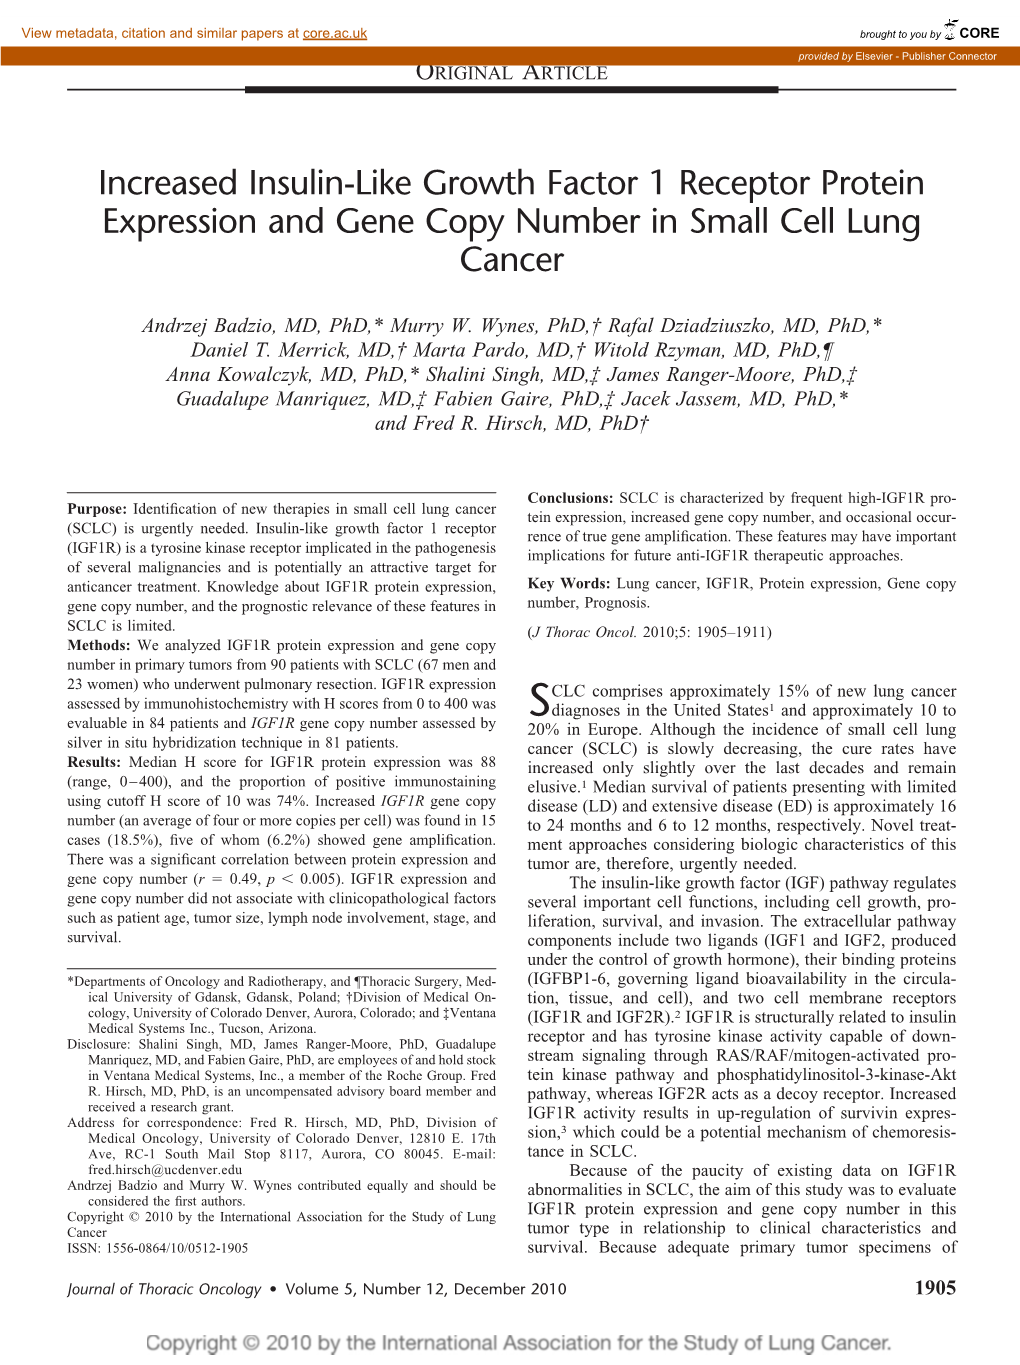 Increased Insulin-Like Growth Factor 1 Receptor Protein Expression and Gene Copy Number in Small Cell Lung Cancer